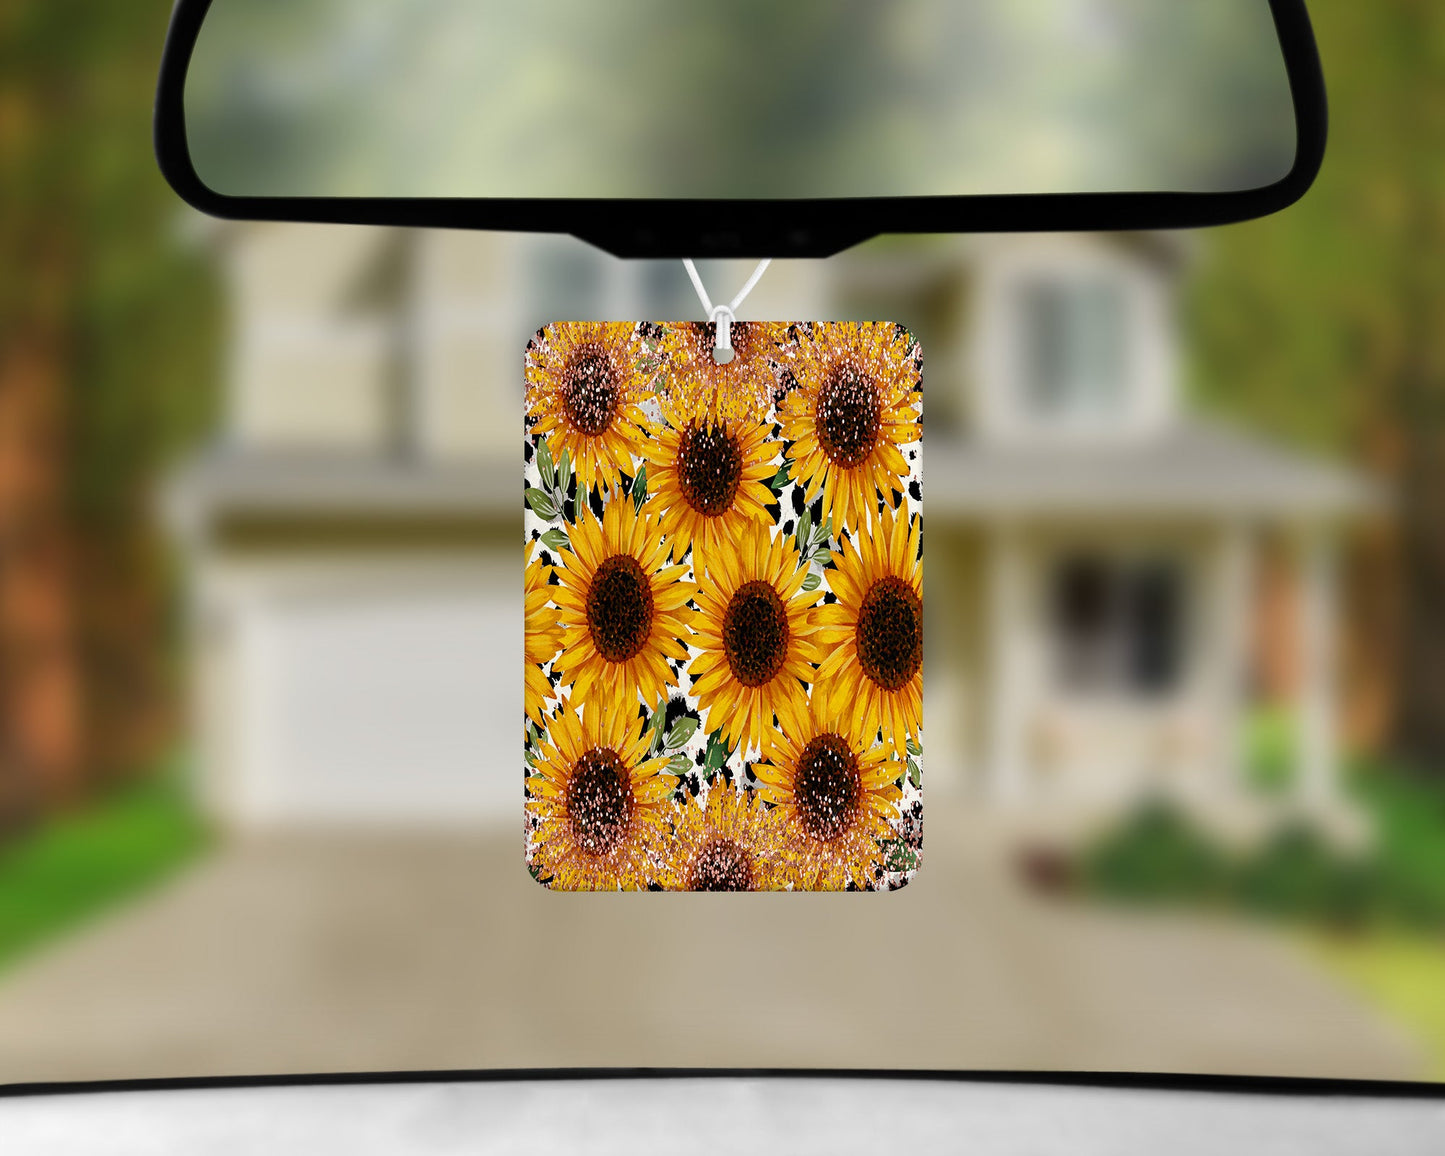 Sunflowers|Freshie|Includes Scent Bottle - Vehicle Air Freshener